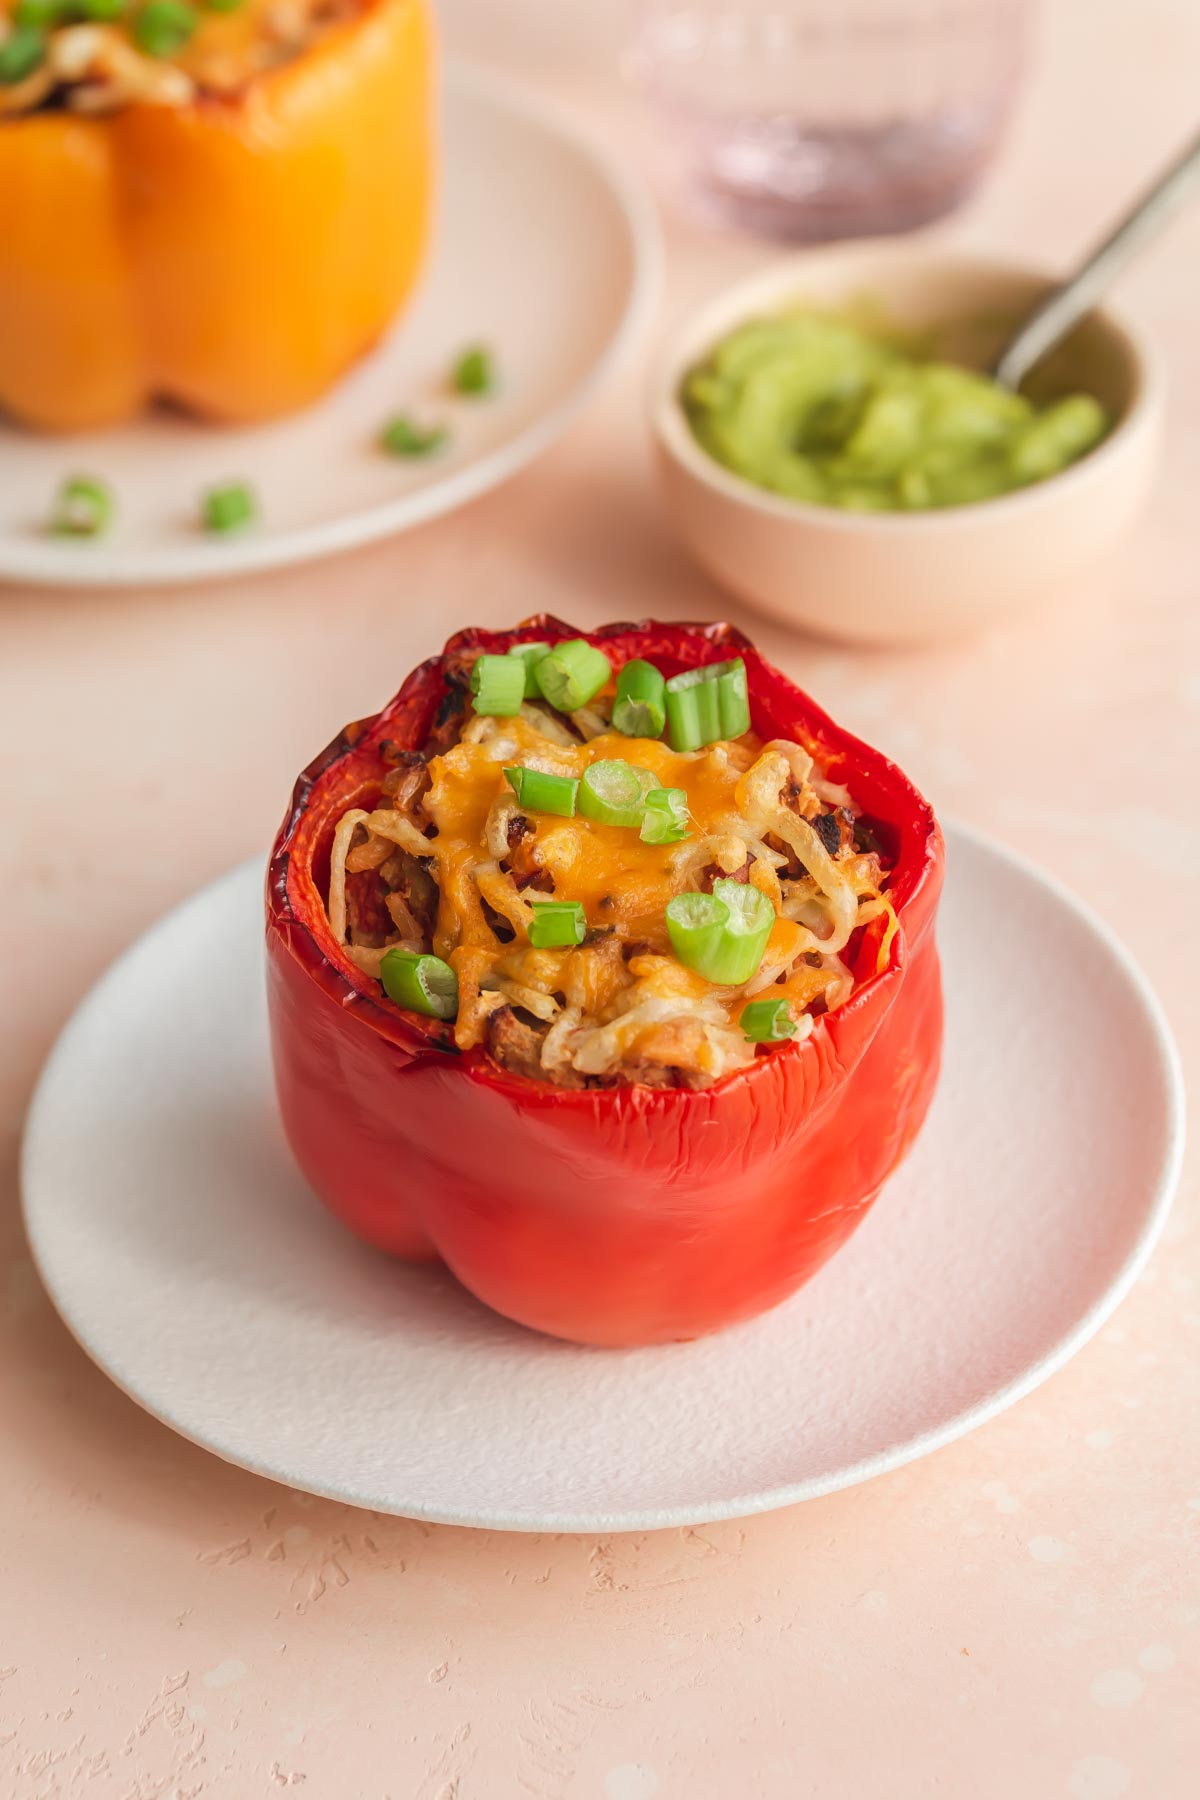 Up close view of a stuffed red bell pepper on a white plate.